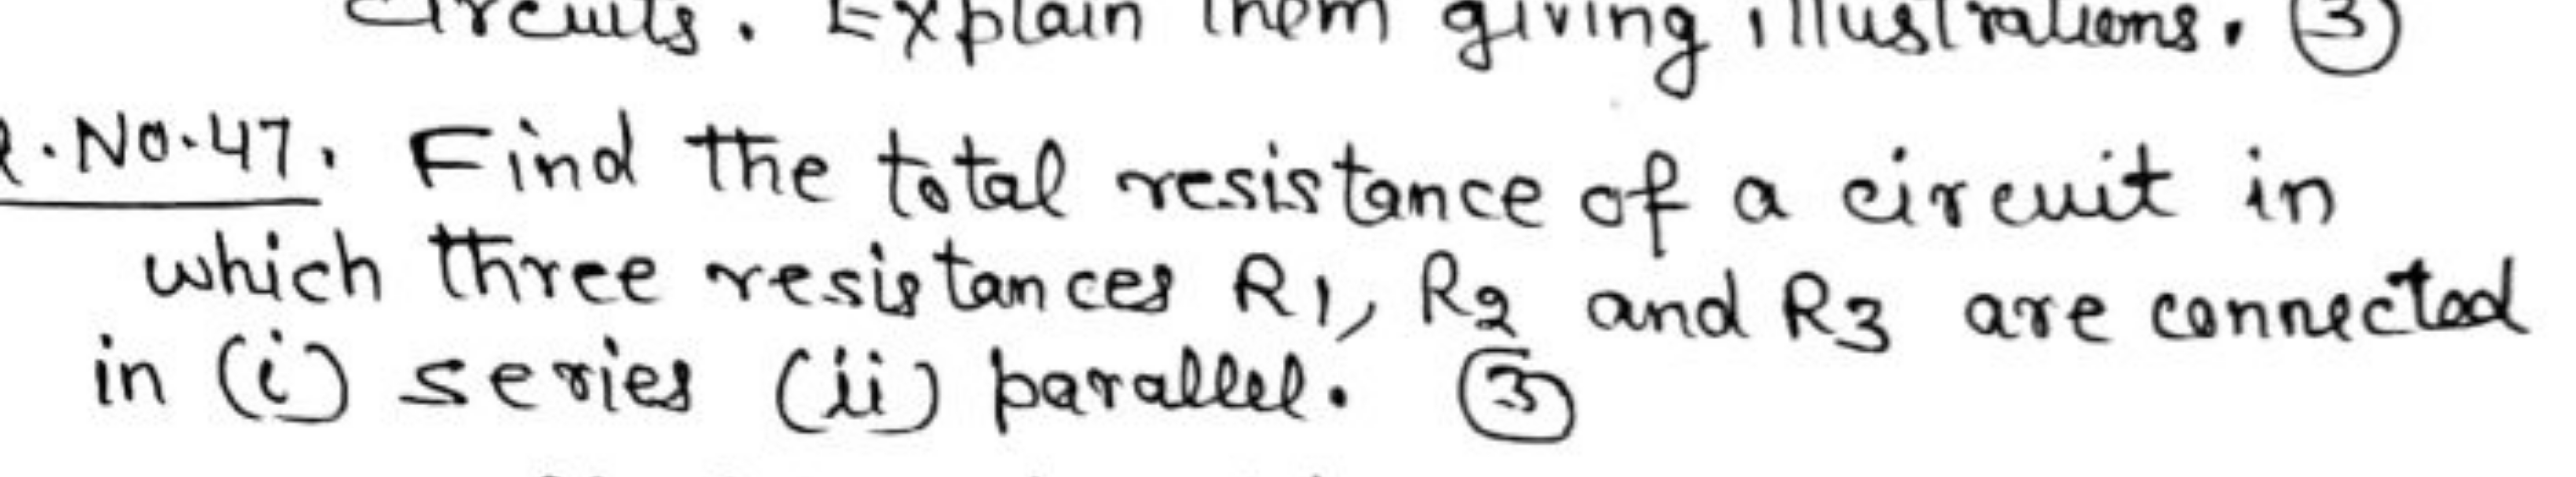 1.No.47. Find the total resistance of a circuit in which three resista